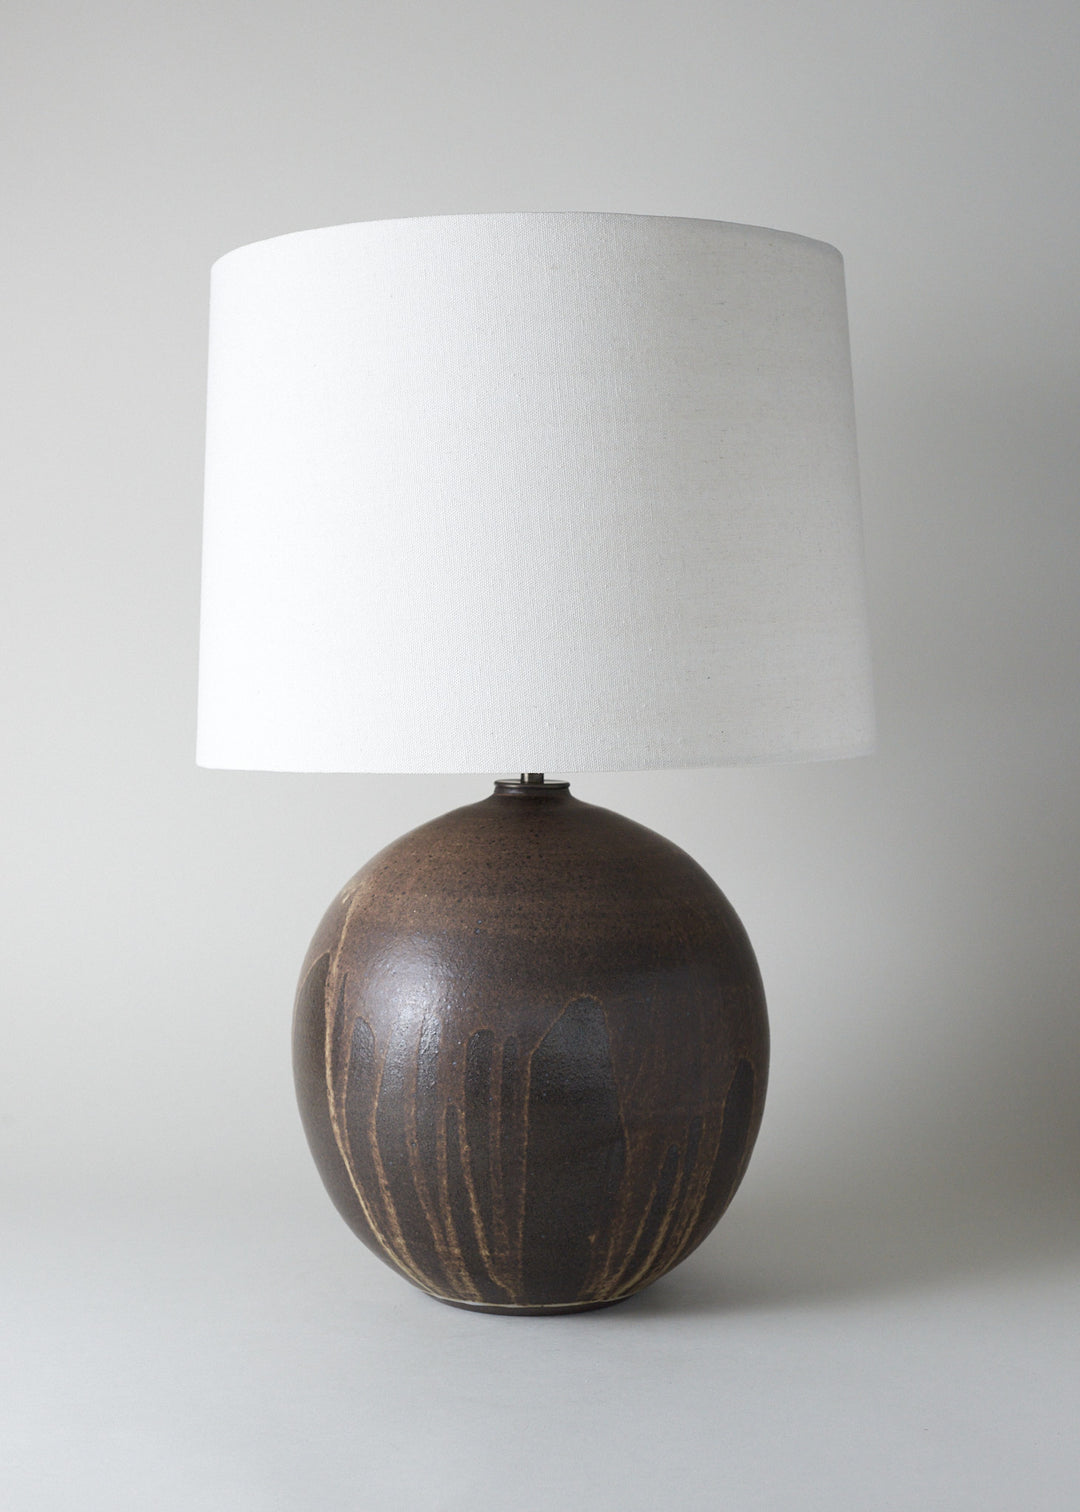 Large Orb Lamp in Live Oak - Victoria Morris Pottery